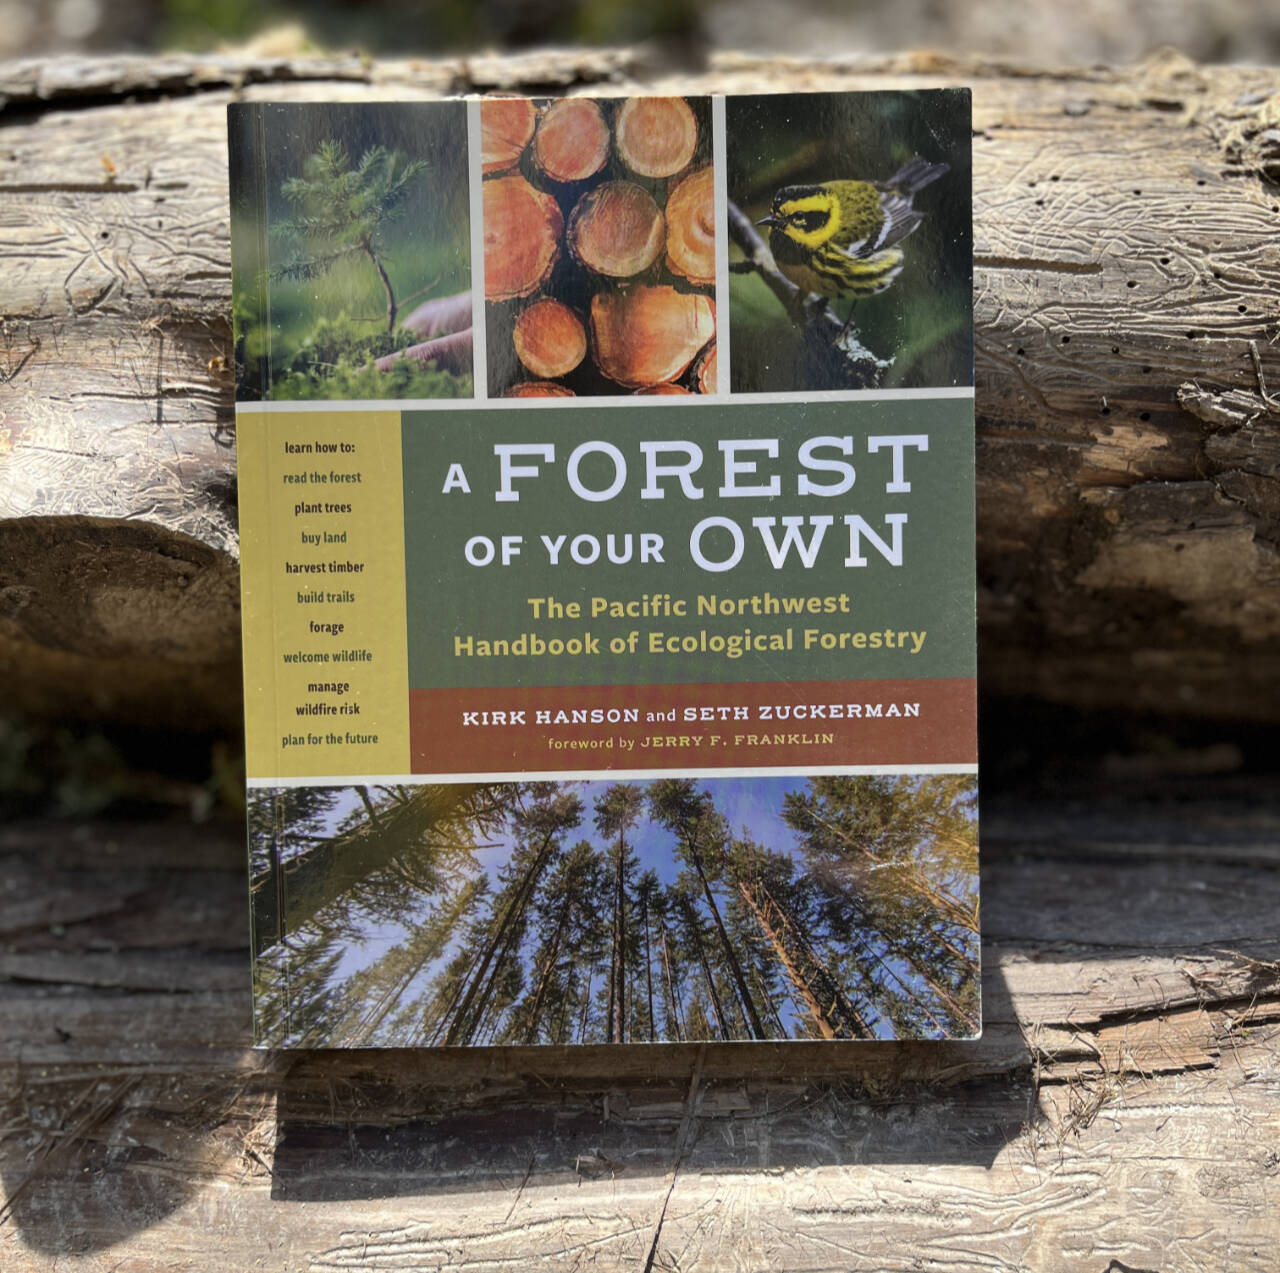 Photo courtesy of Seth Zuckerman / Author Seth Zuckerman will speak about his new book, “A Forest of Your Own: The Pacific Northwest Handbook of Ecological Forestry,” at the Dungeness River Nature Center on May 23.